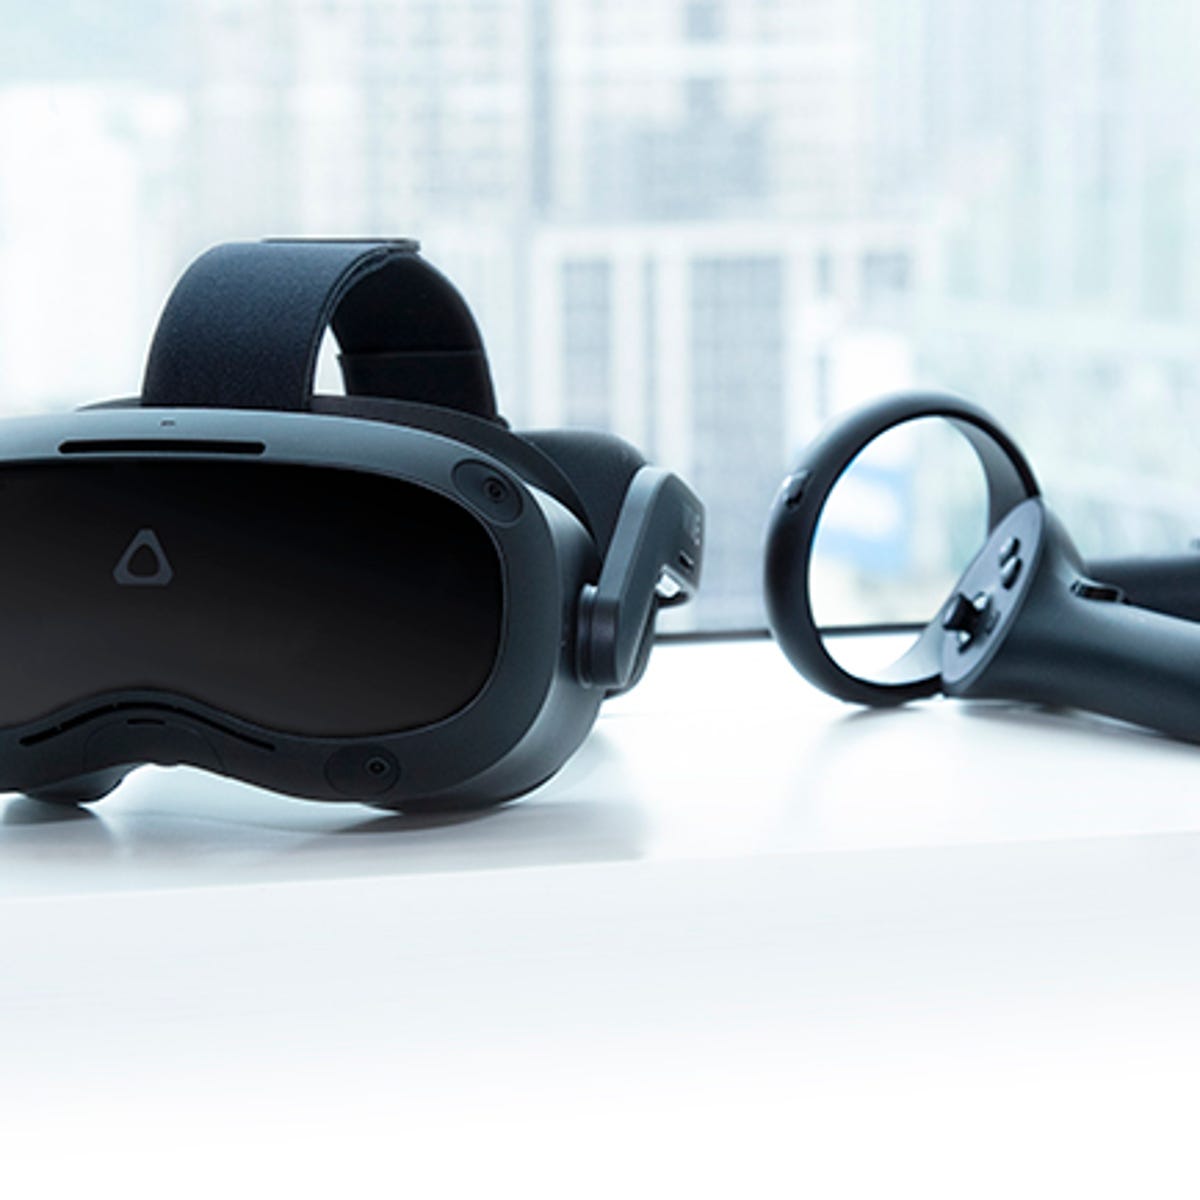 HTC Focus 3 review: A standalone VR headset business | ZDNET